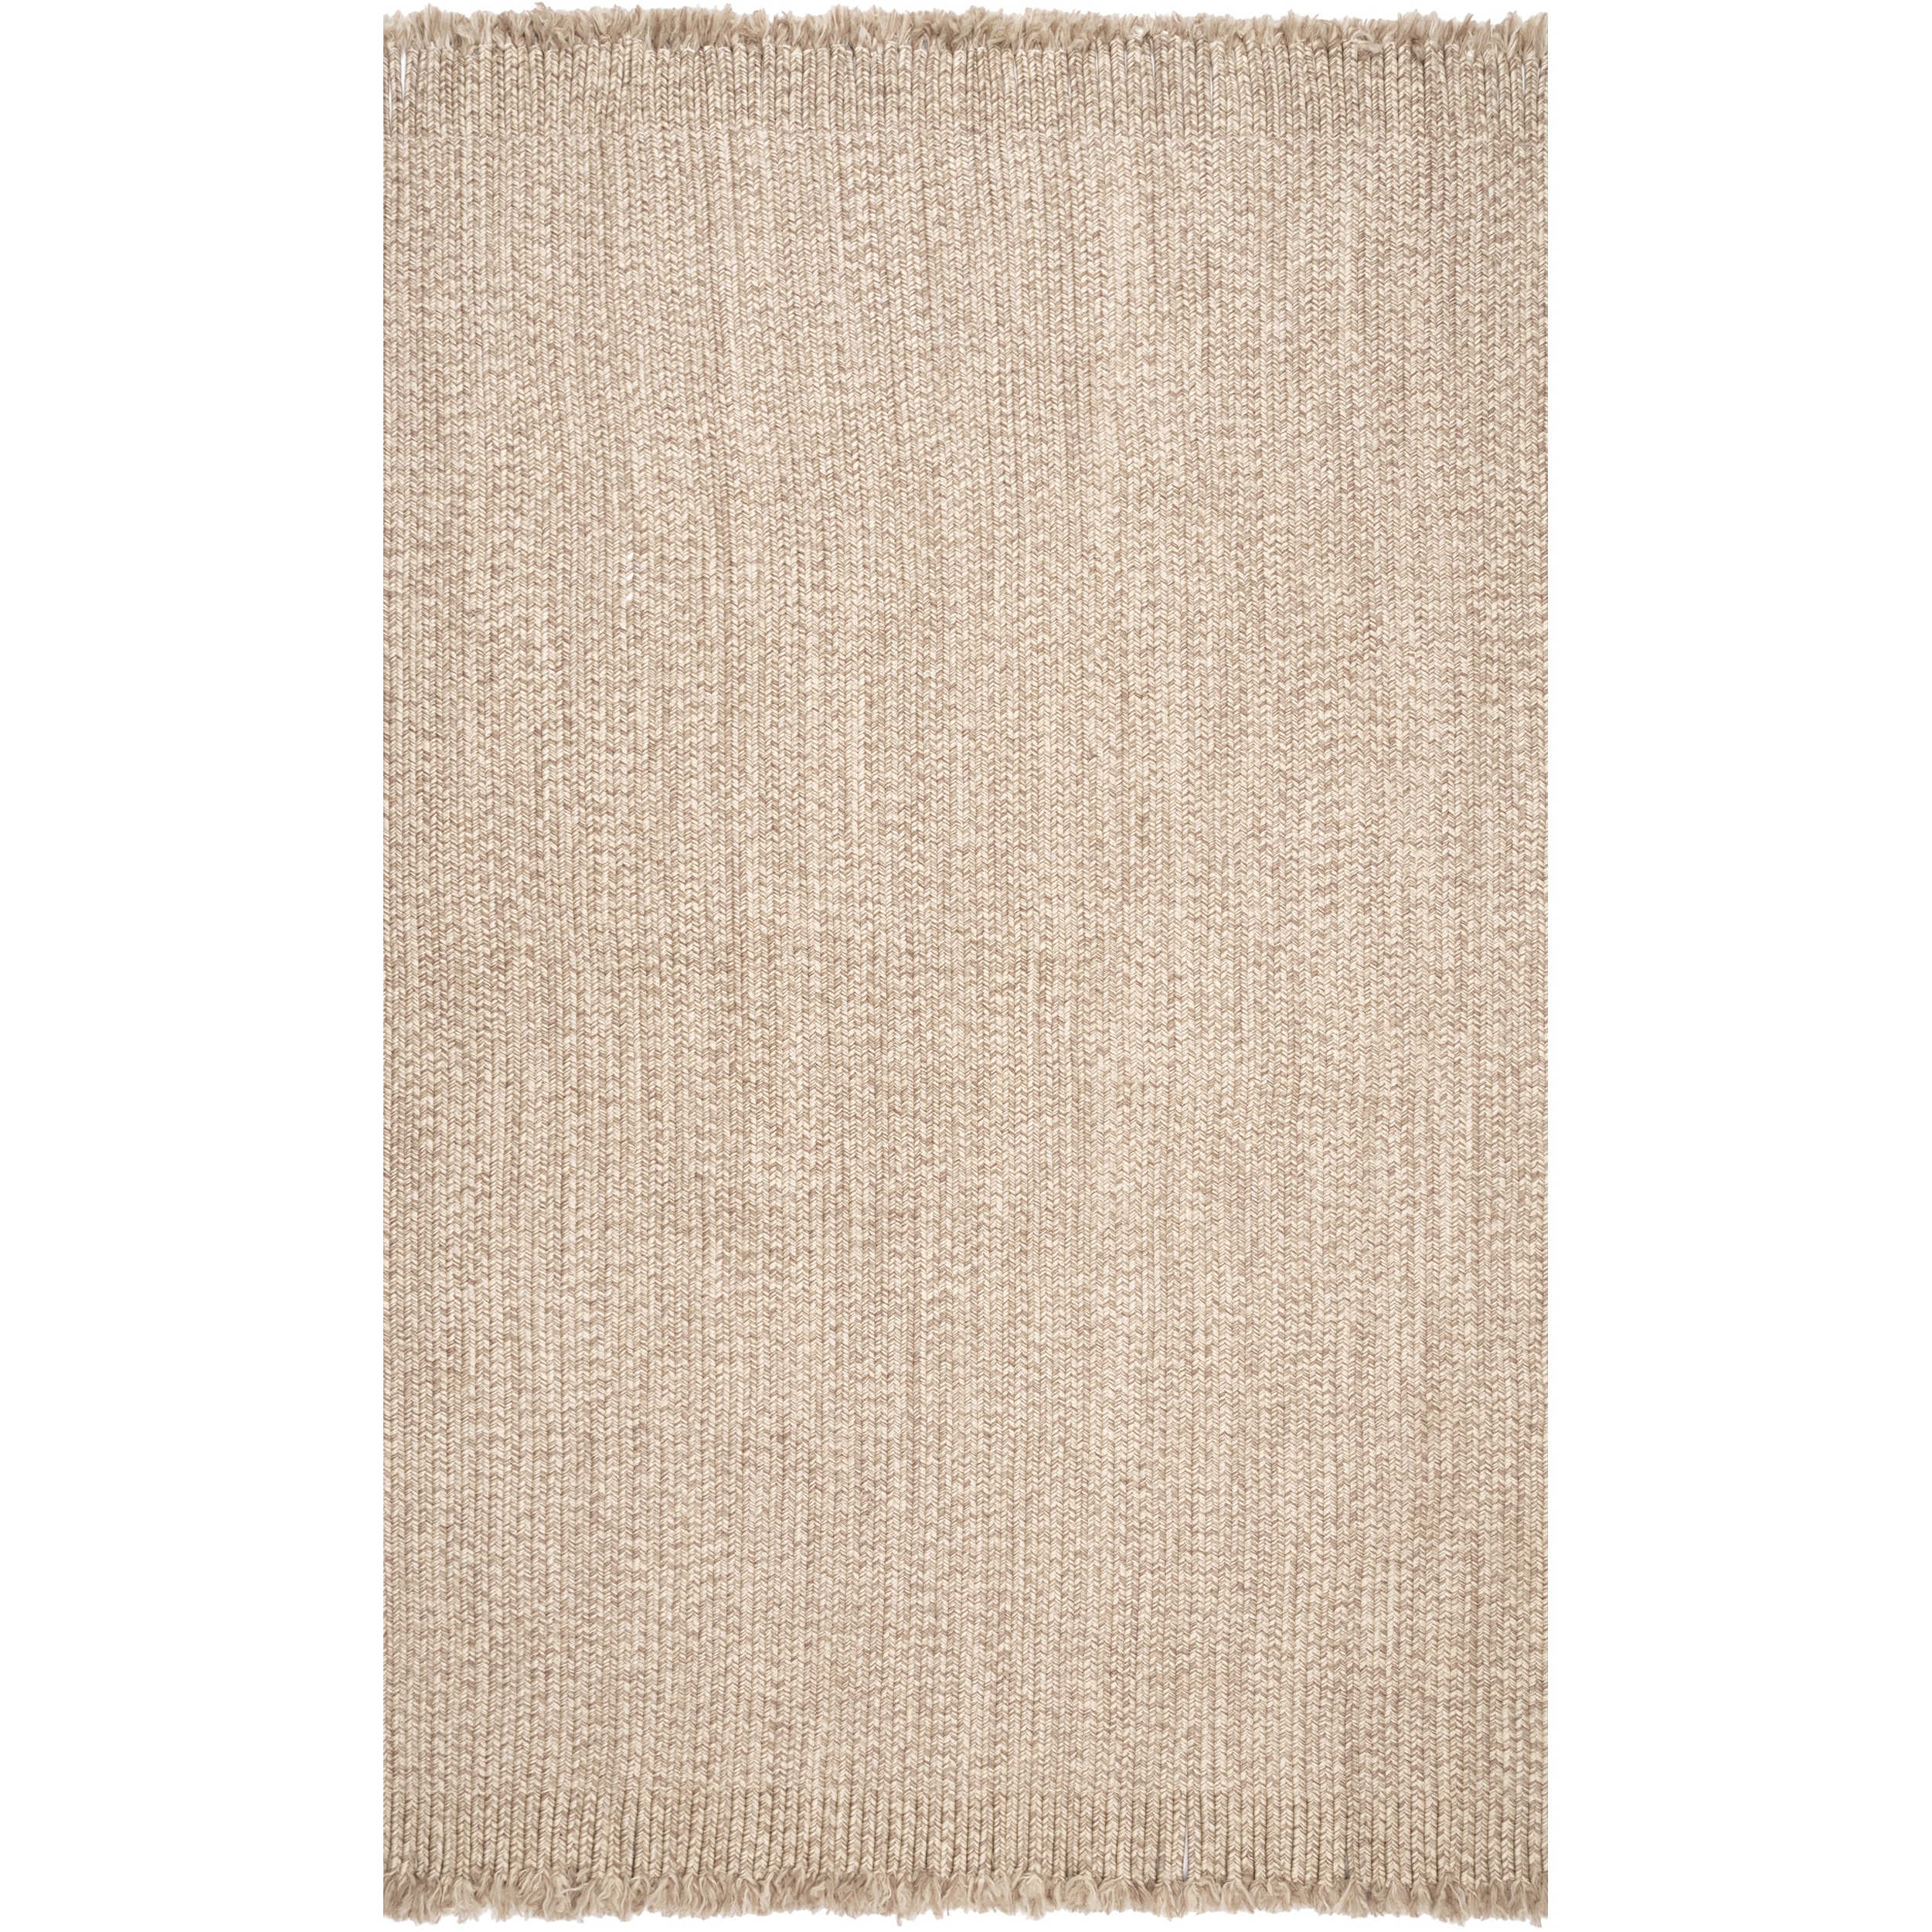 nuLOOM Courtney Braided Indoor/Outdoor Area Rug, 10' x 14', Tan - image 1 of 2